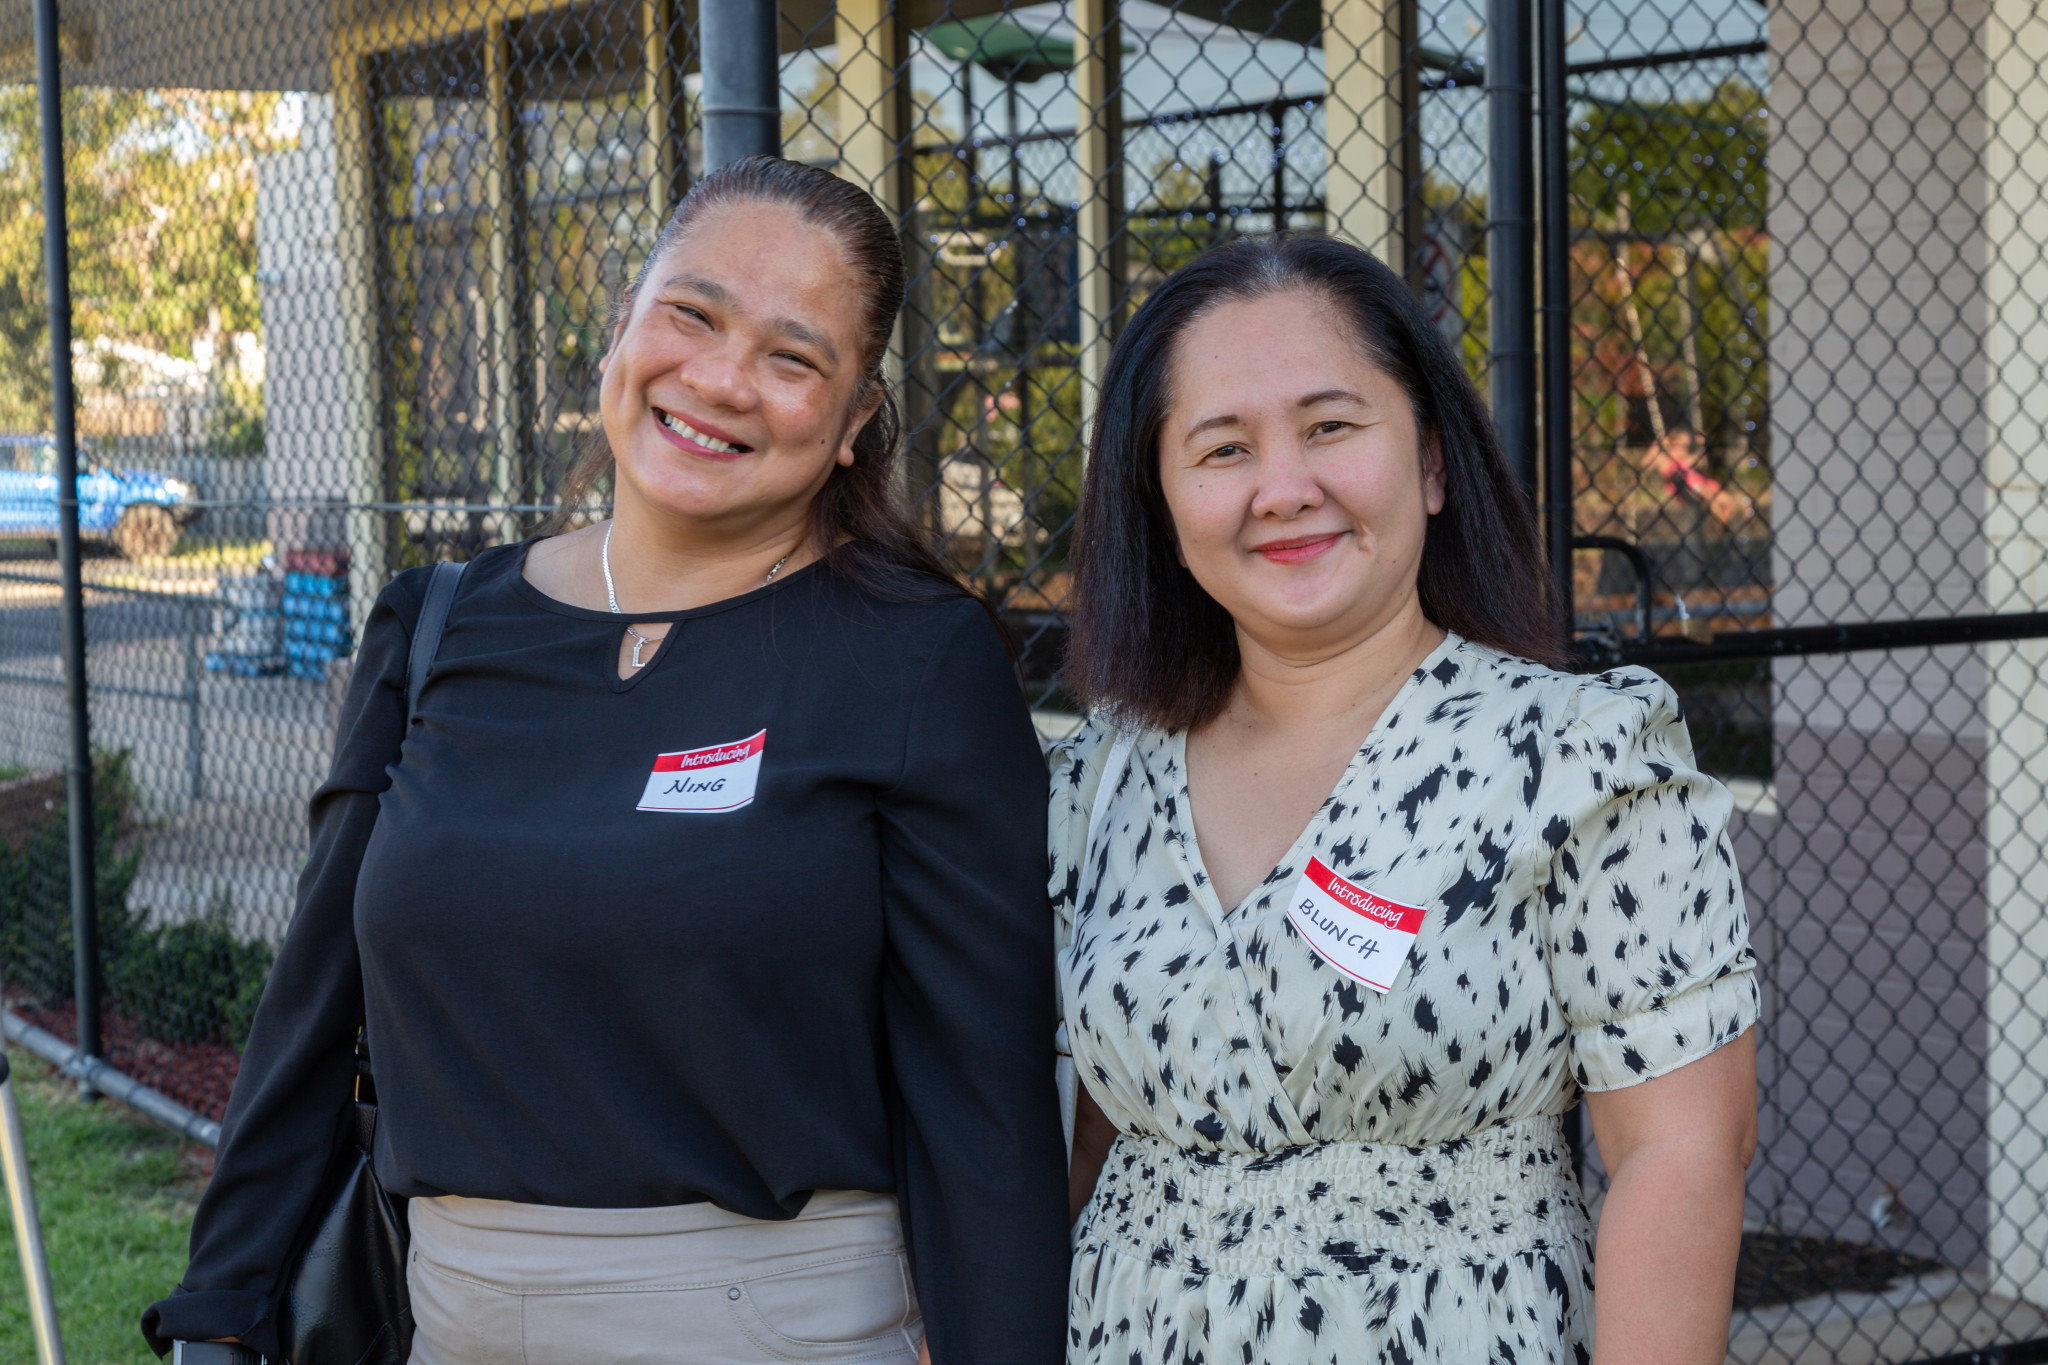 Ning Sanduco and Blunch Kyamko at the Welcome to Gilgandra event last night. Photo by Narelle Rodway